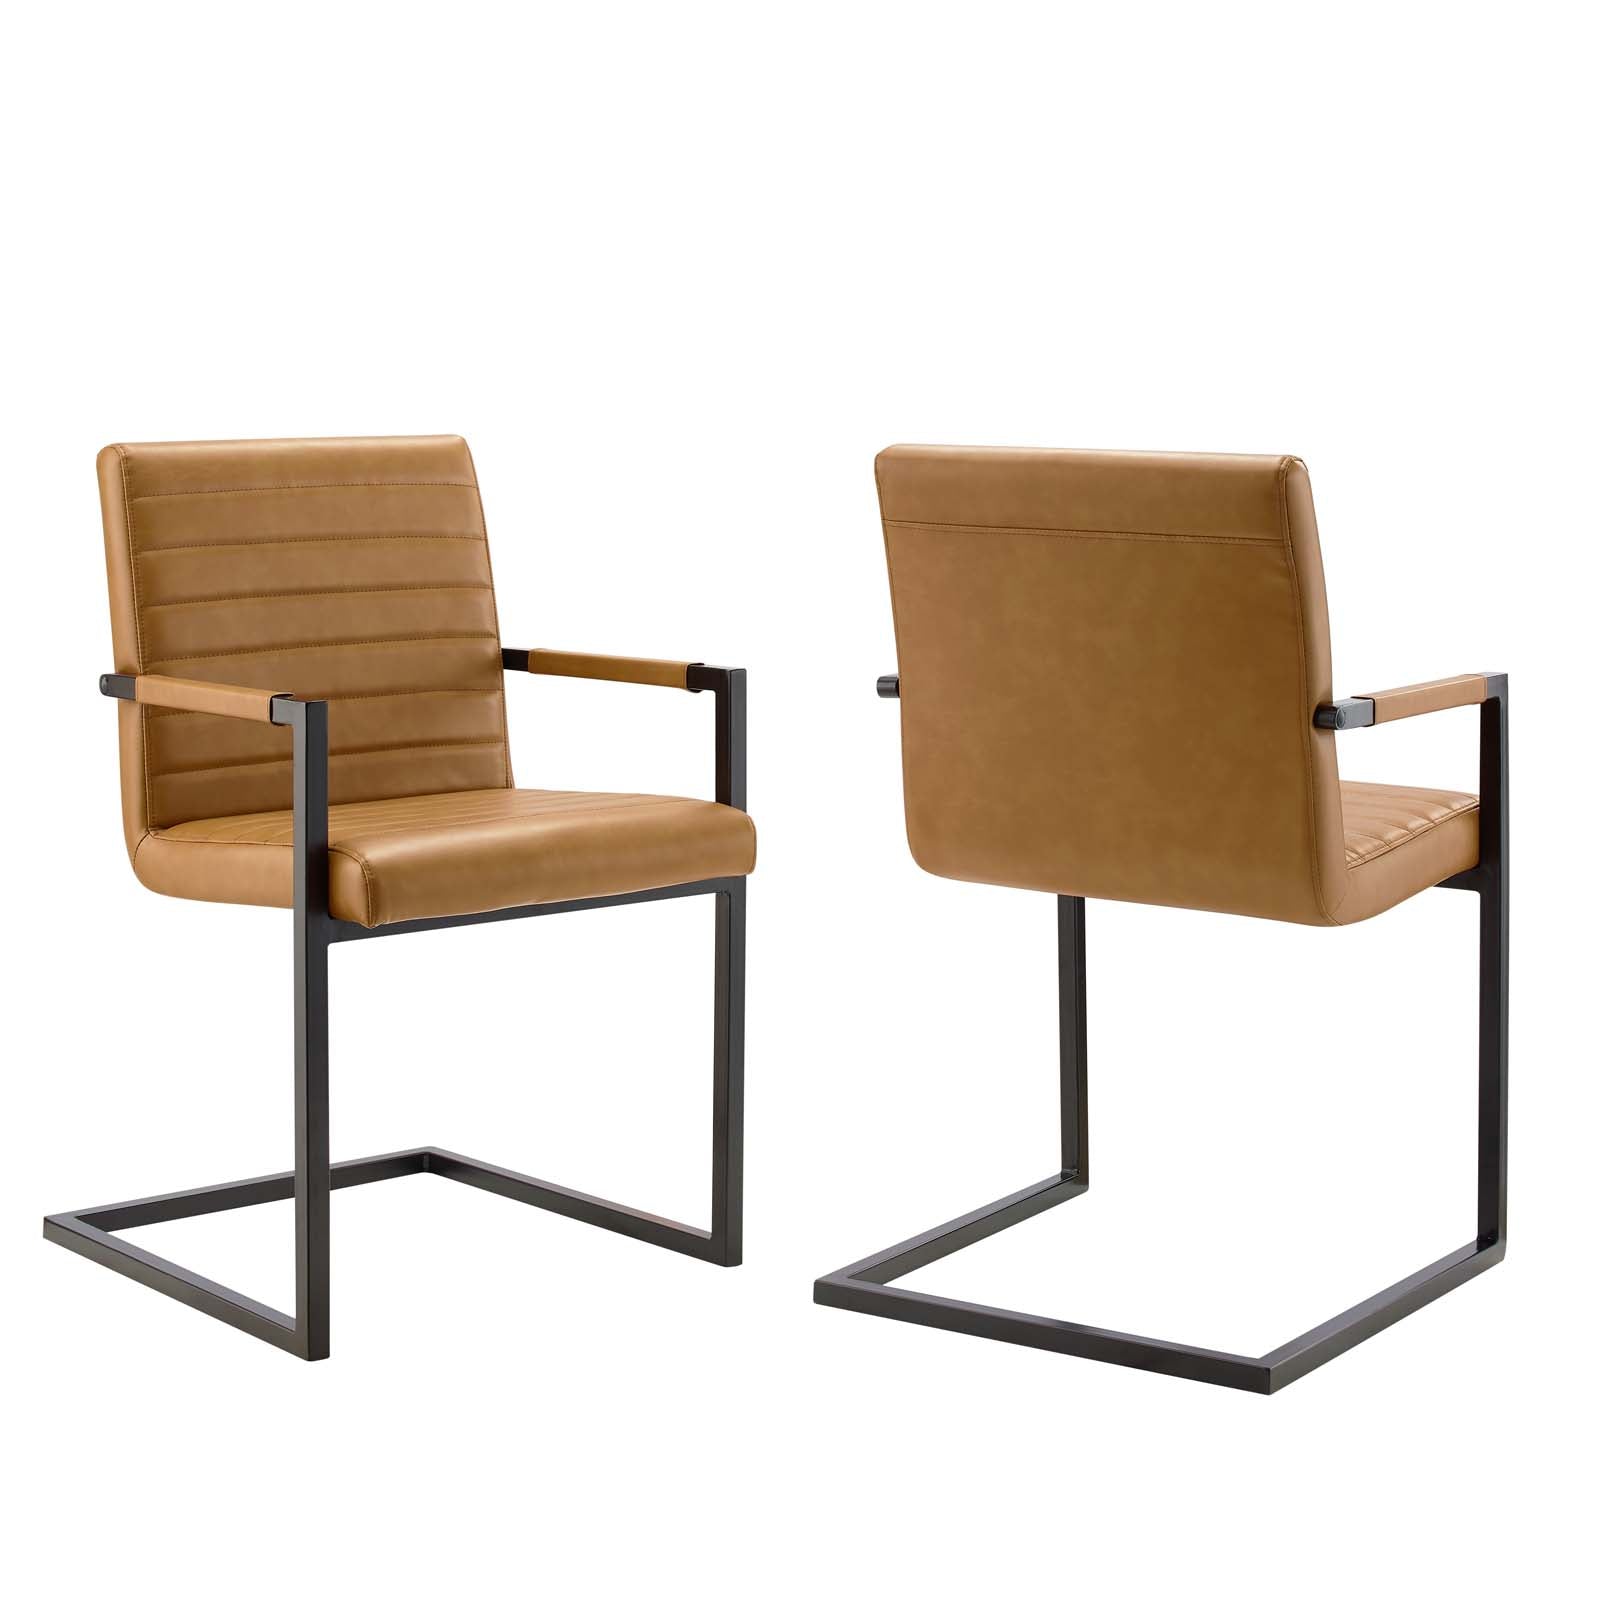 Modway Dining Chairs - Savoy Vegan Leather Dining Chairs - Set of 2 Tan